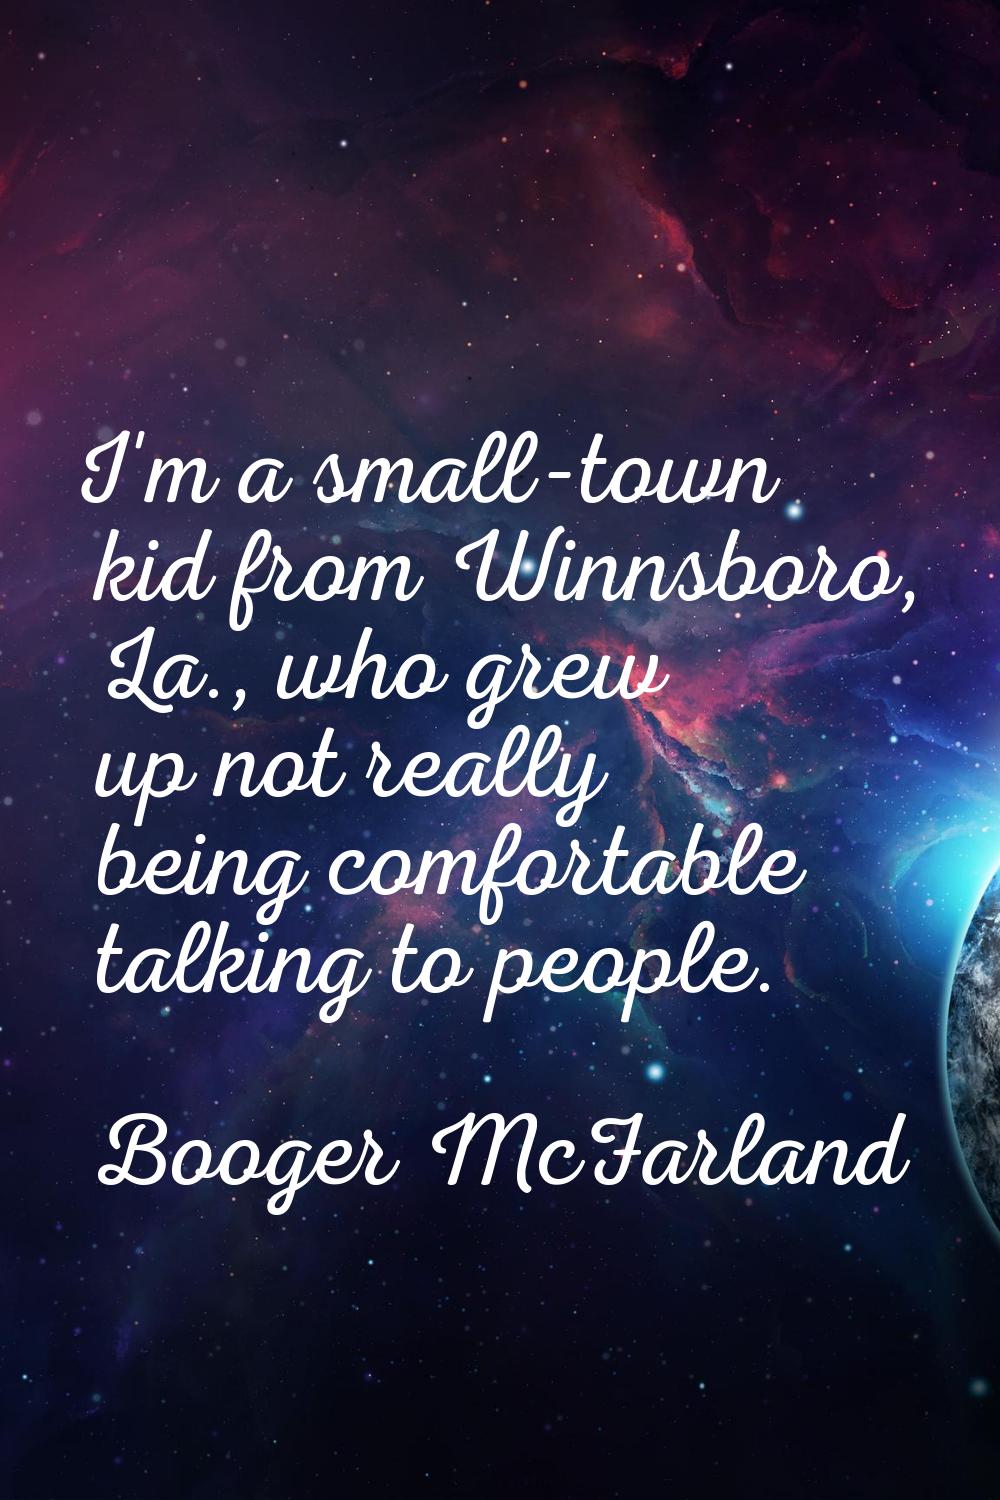 I'm a small-town kid from Winnsboro, La., who grew up not really being comfortable talking to peopl